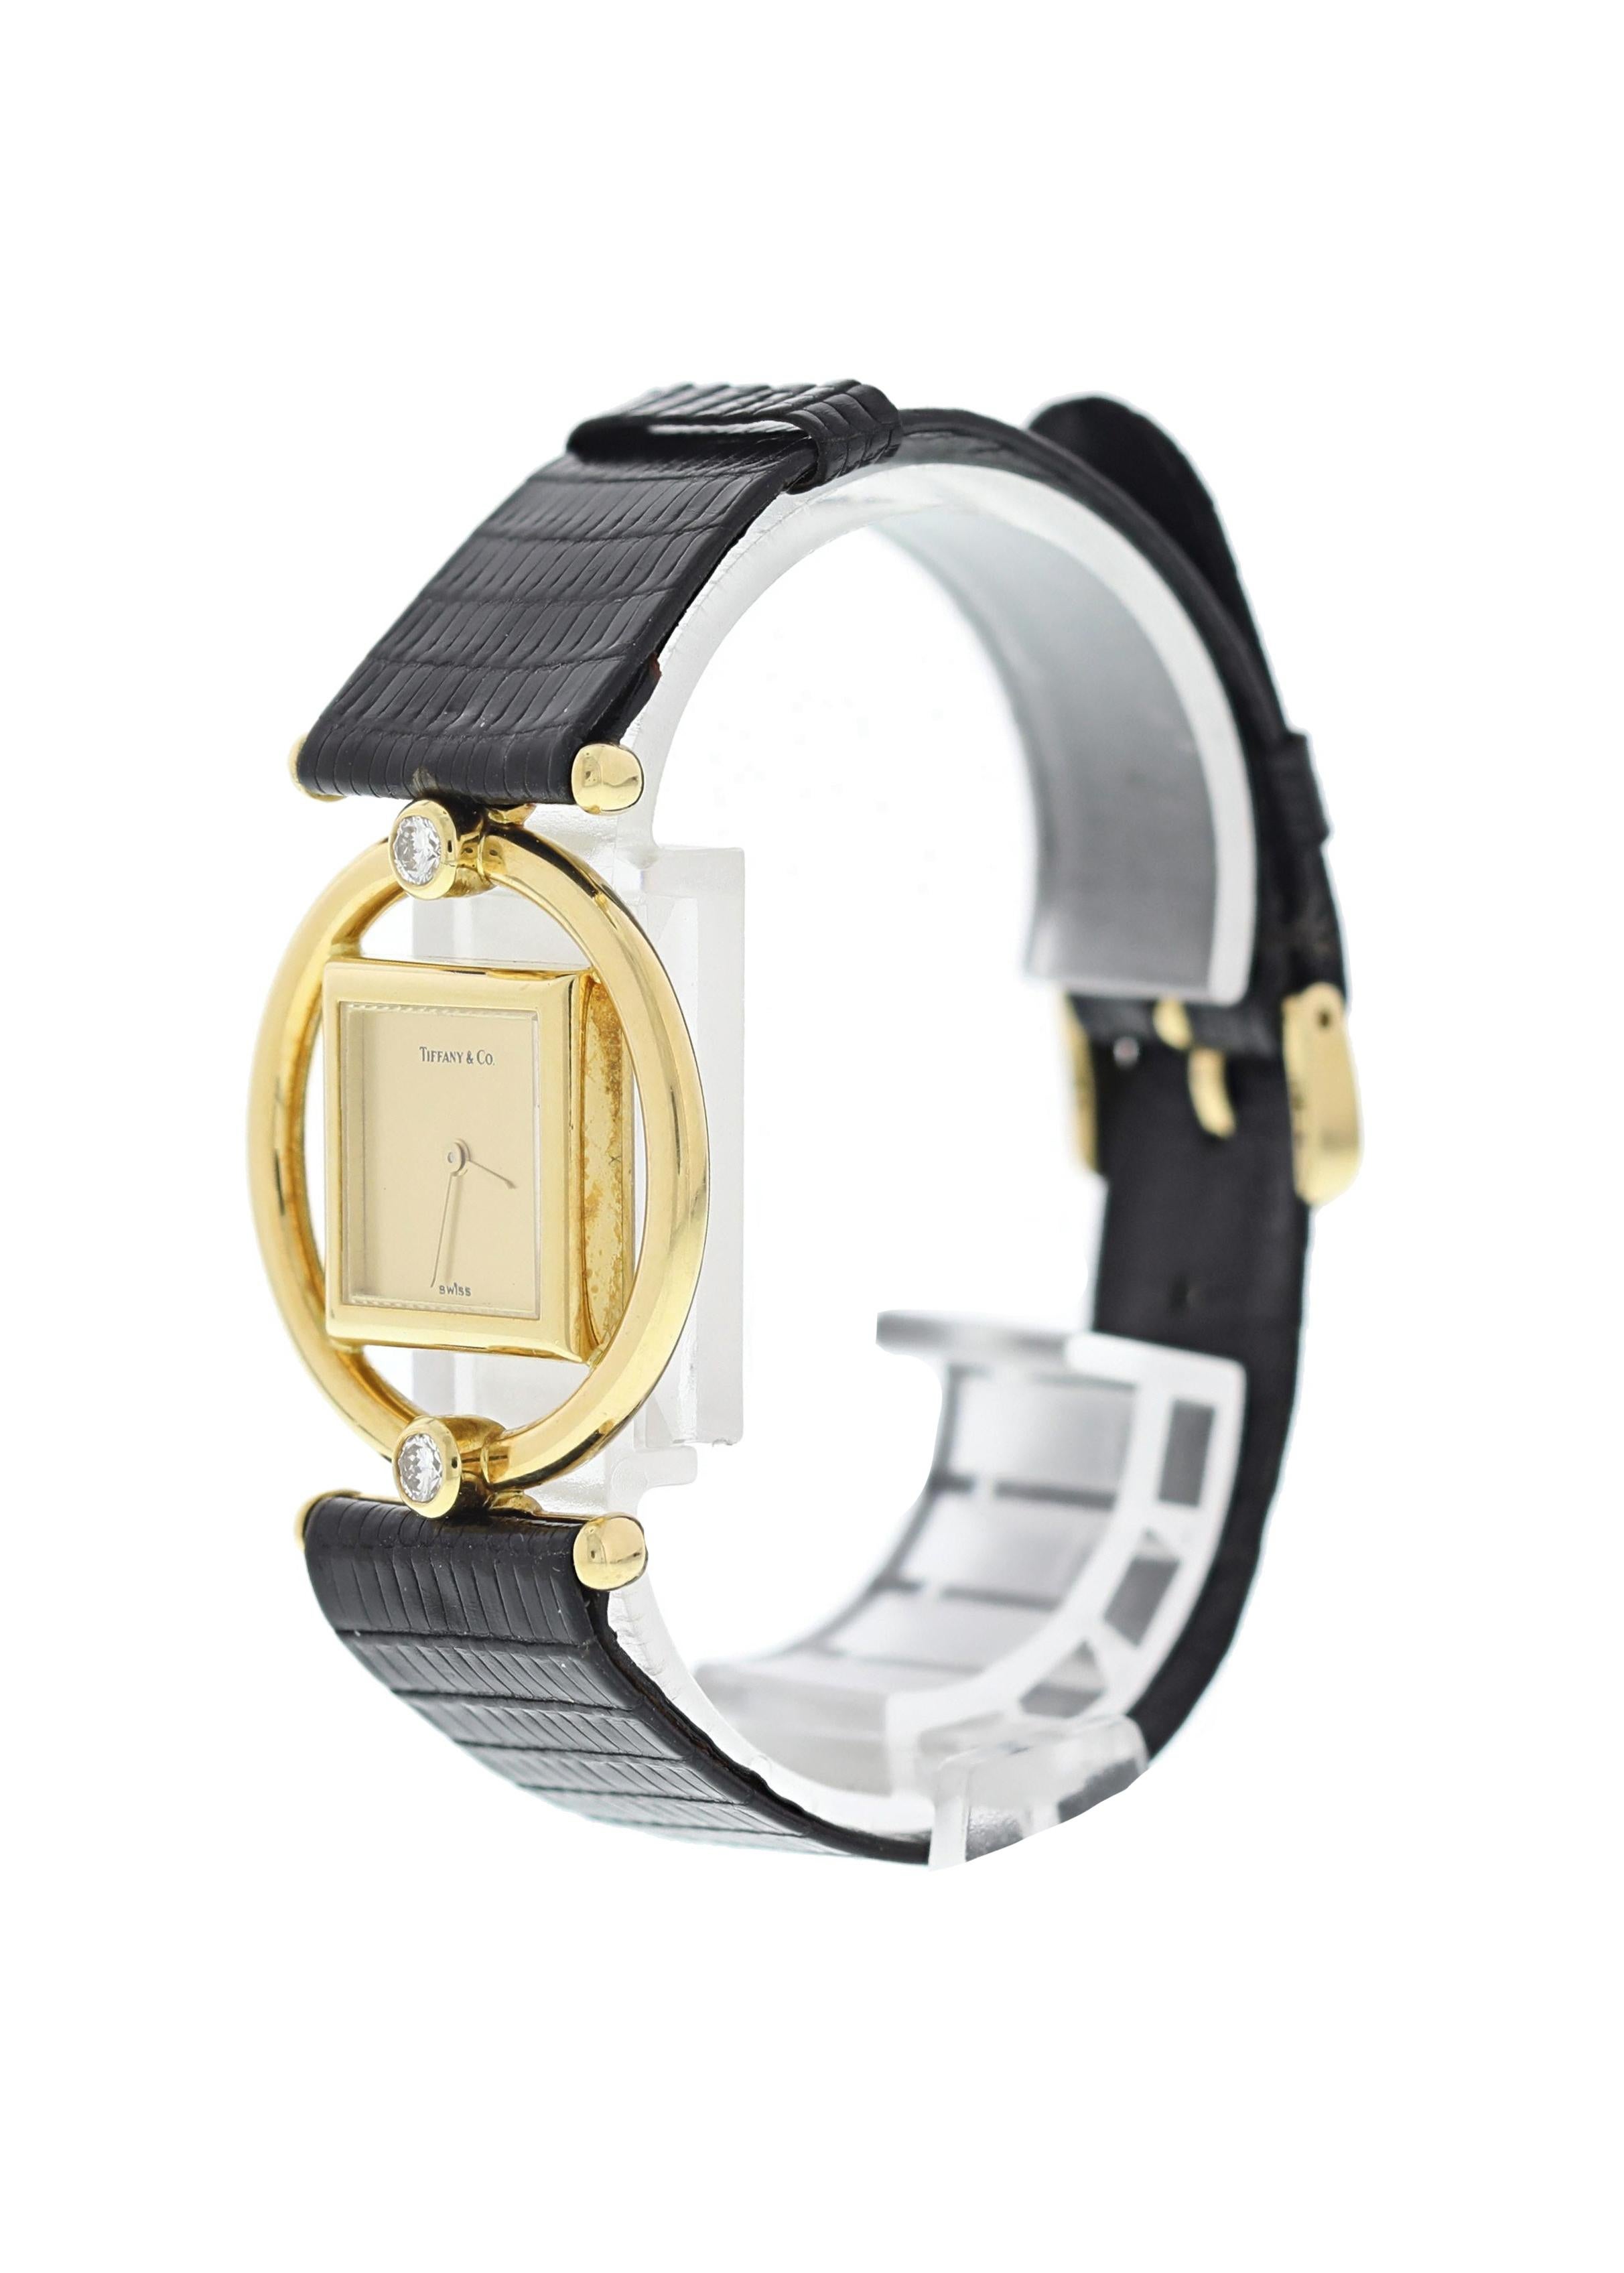 Tiffany & CO. Paloma Picasso 18k Yellow Gold Ladies Watch. 30mm 18k yellow gold round outer case with a 17.5mm inner floating square case. Factory set diamonds at the 6 and 12 o'clock position. Champagne dial with gold hands. Black lizard leather